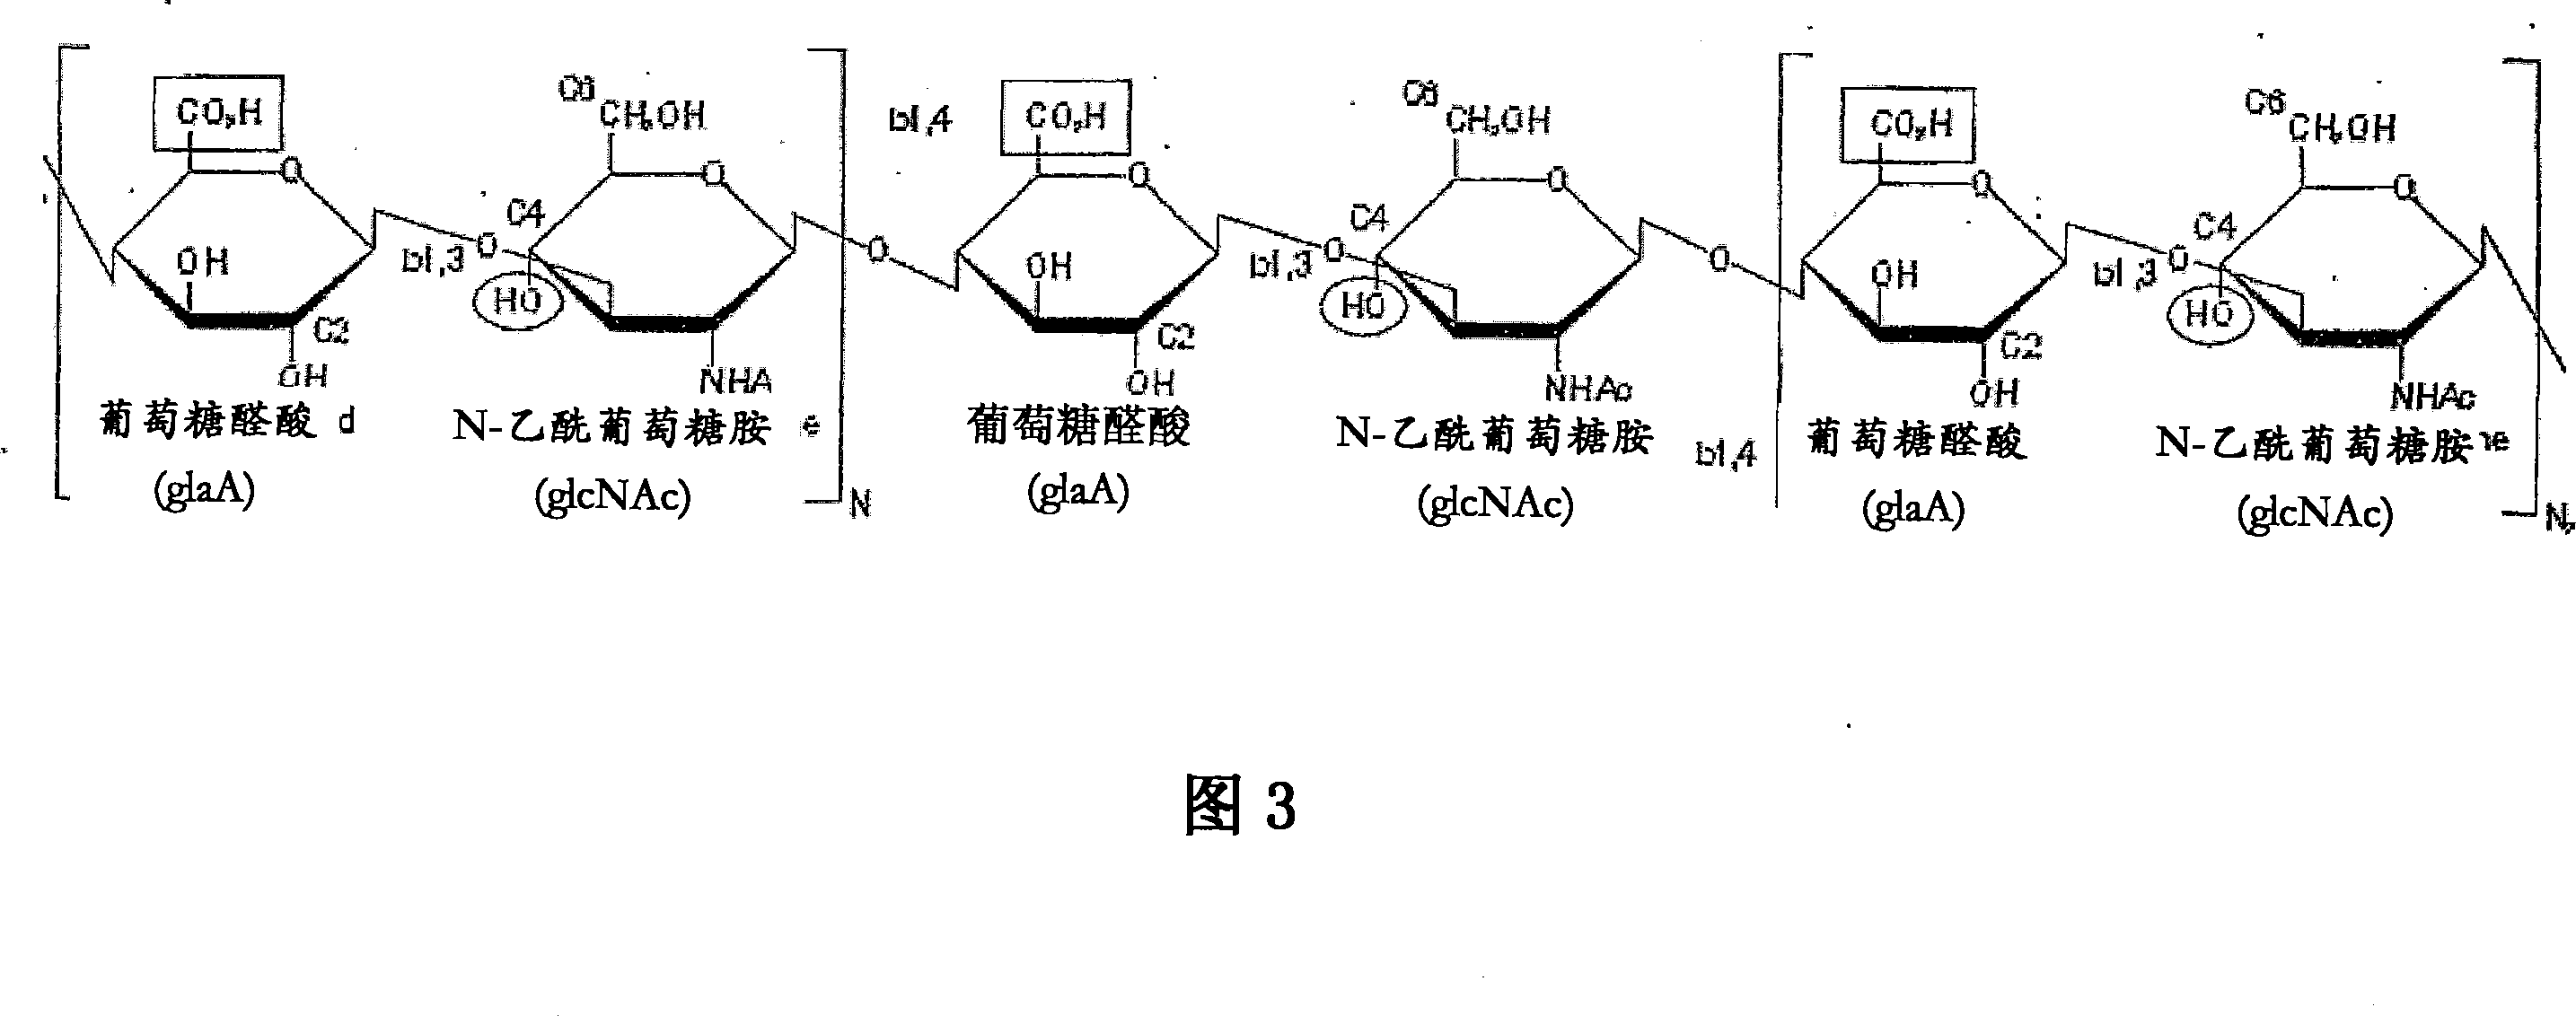 Hydroxyphenyl cross-linked macromolecular network and applications thereof